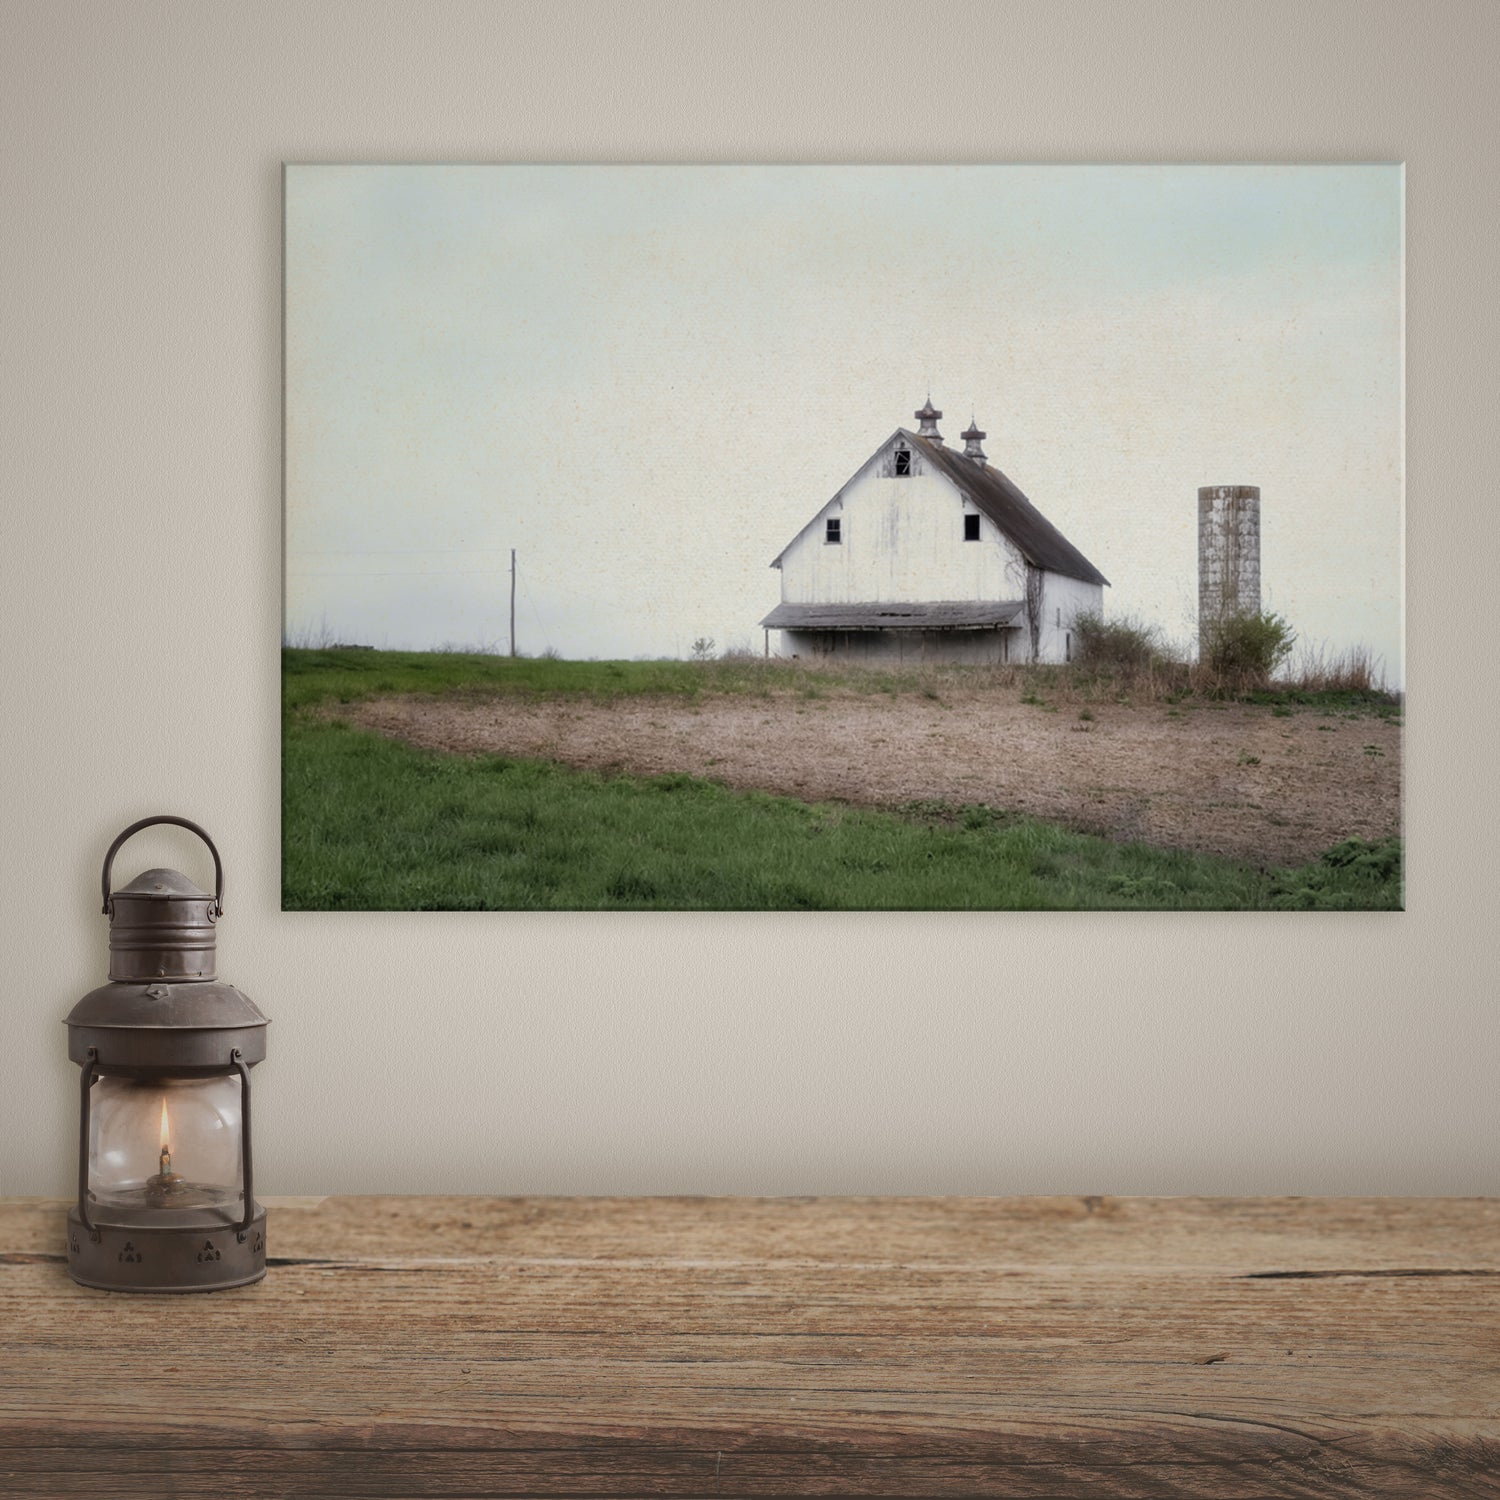 Canvas print featuring an old white barn, perfect for farmhouse style wall decor, set in a rustic and tranquil countryside setting.